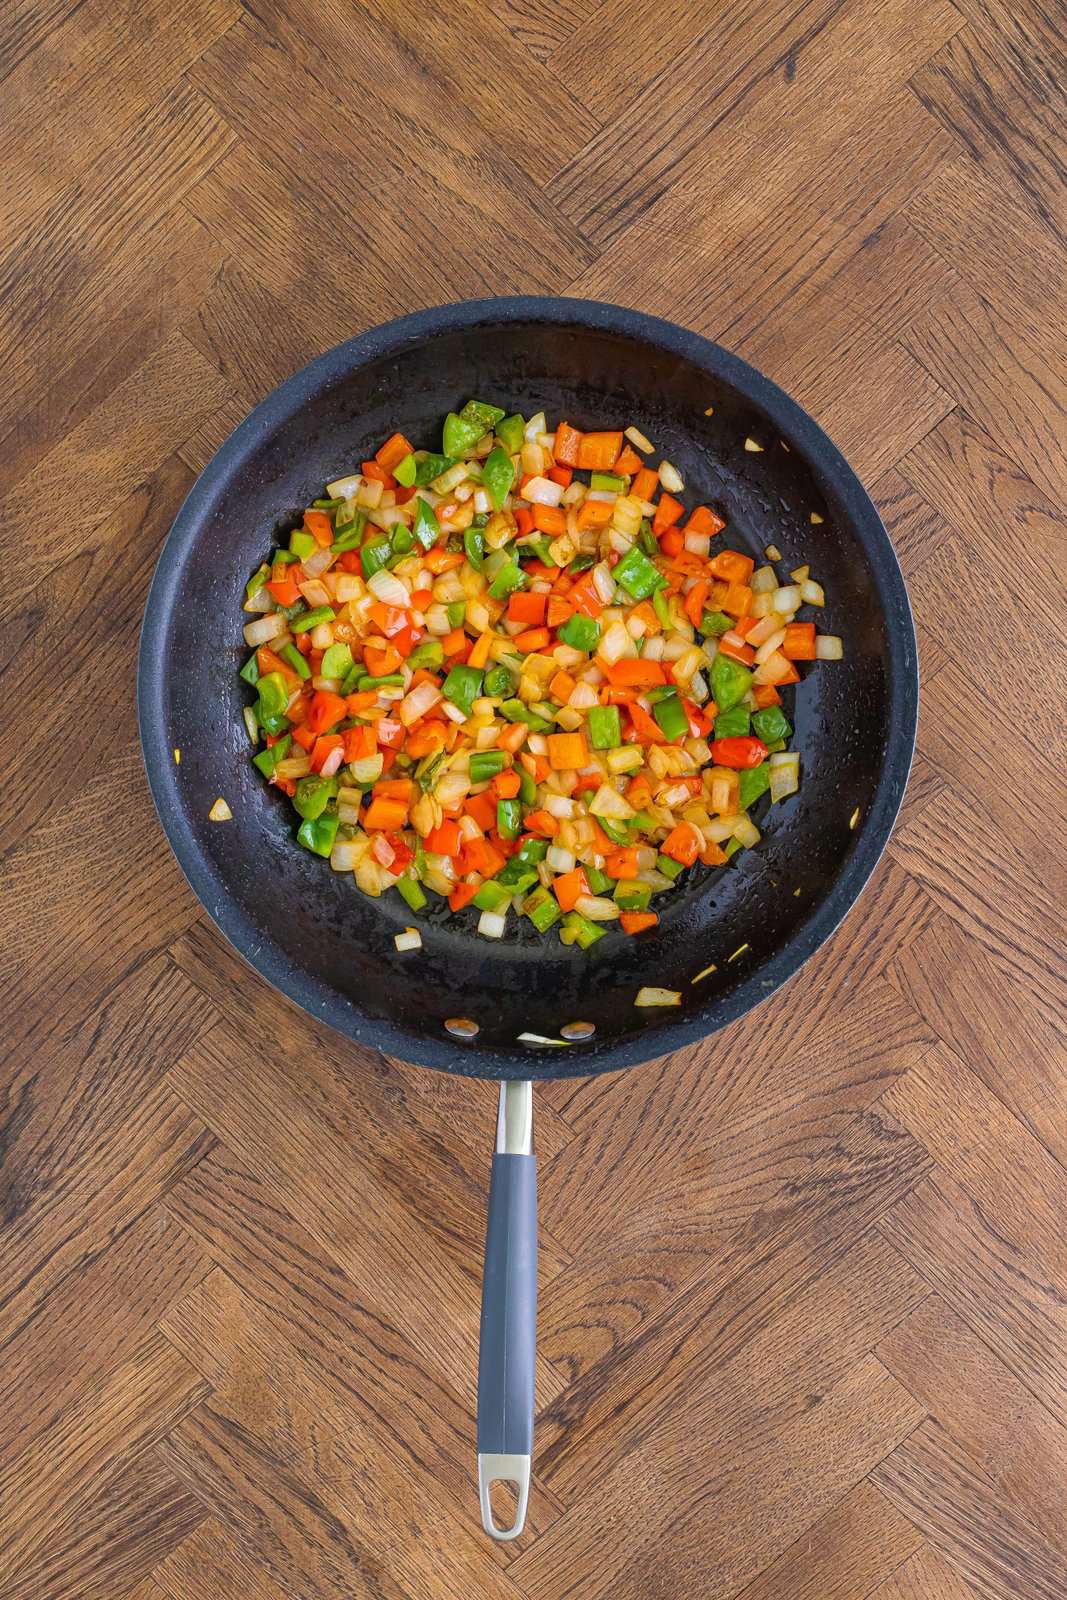 A skillet with onion, green bell pepper, and red bell pepper.